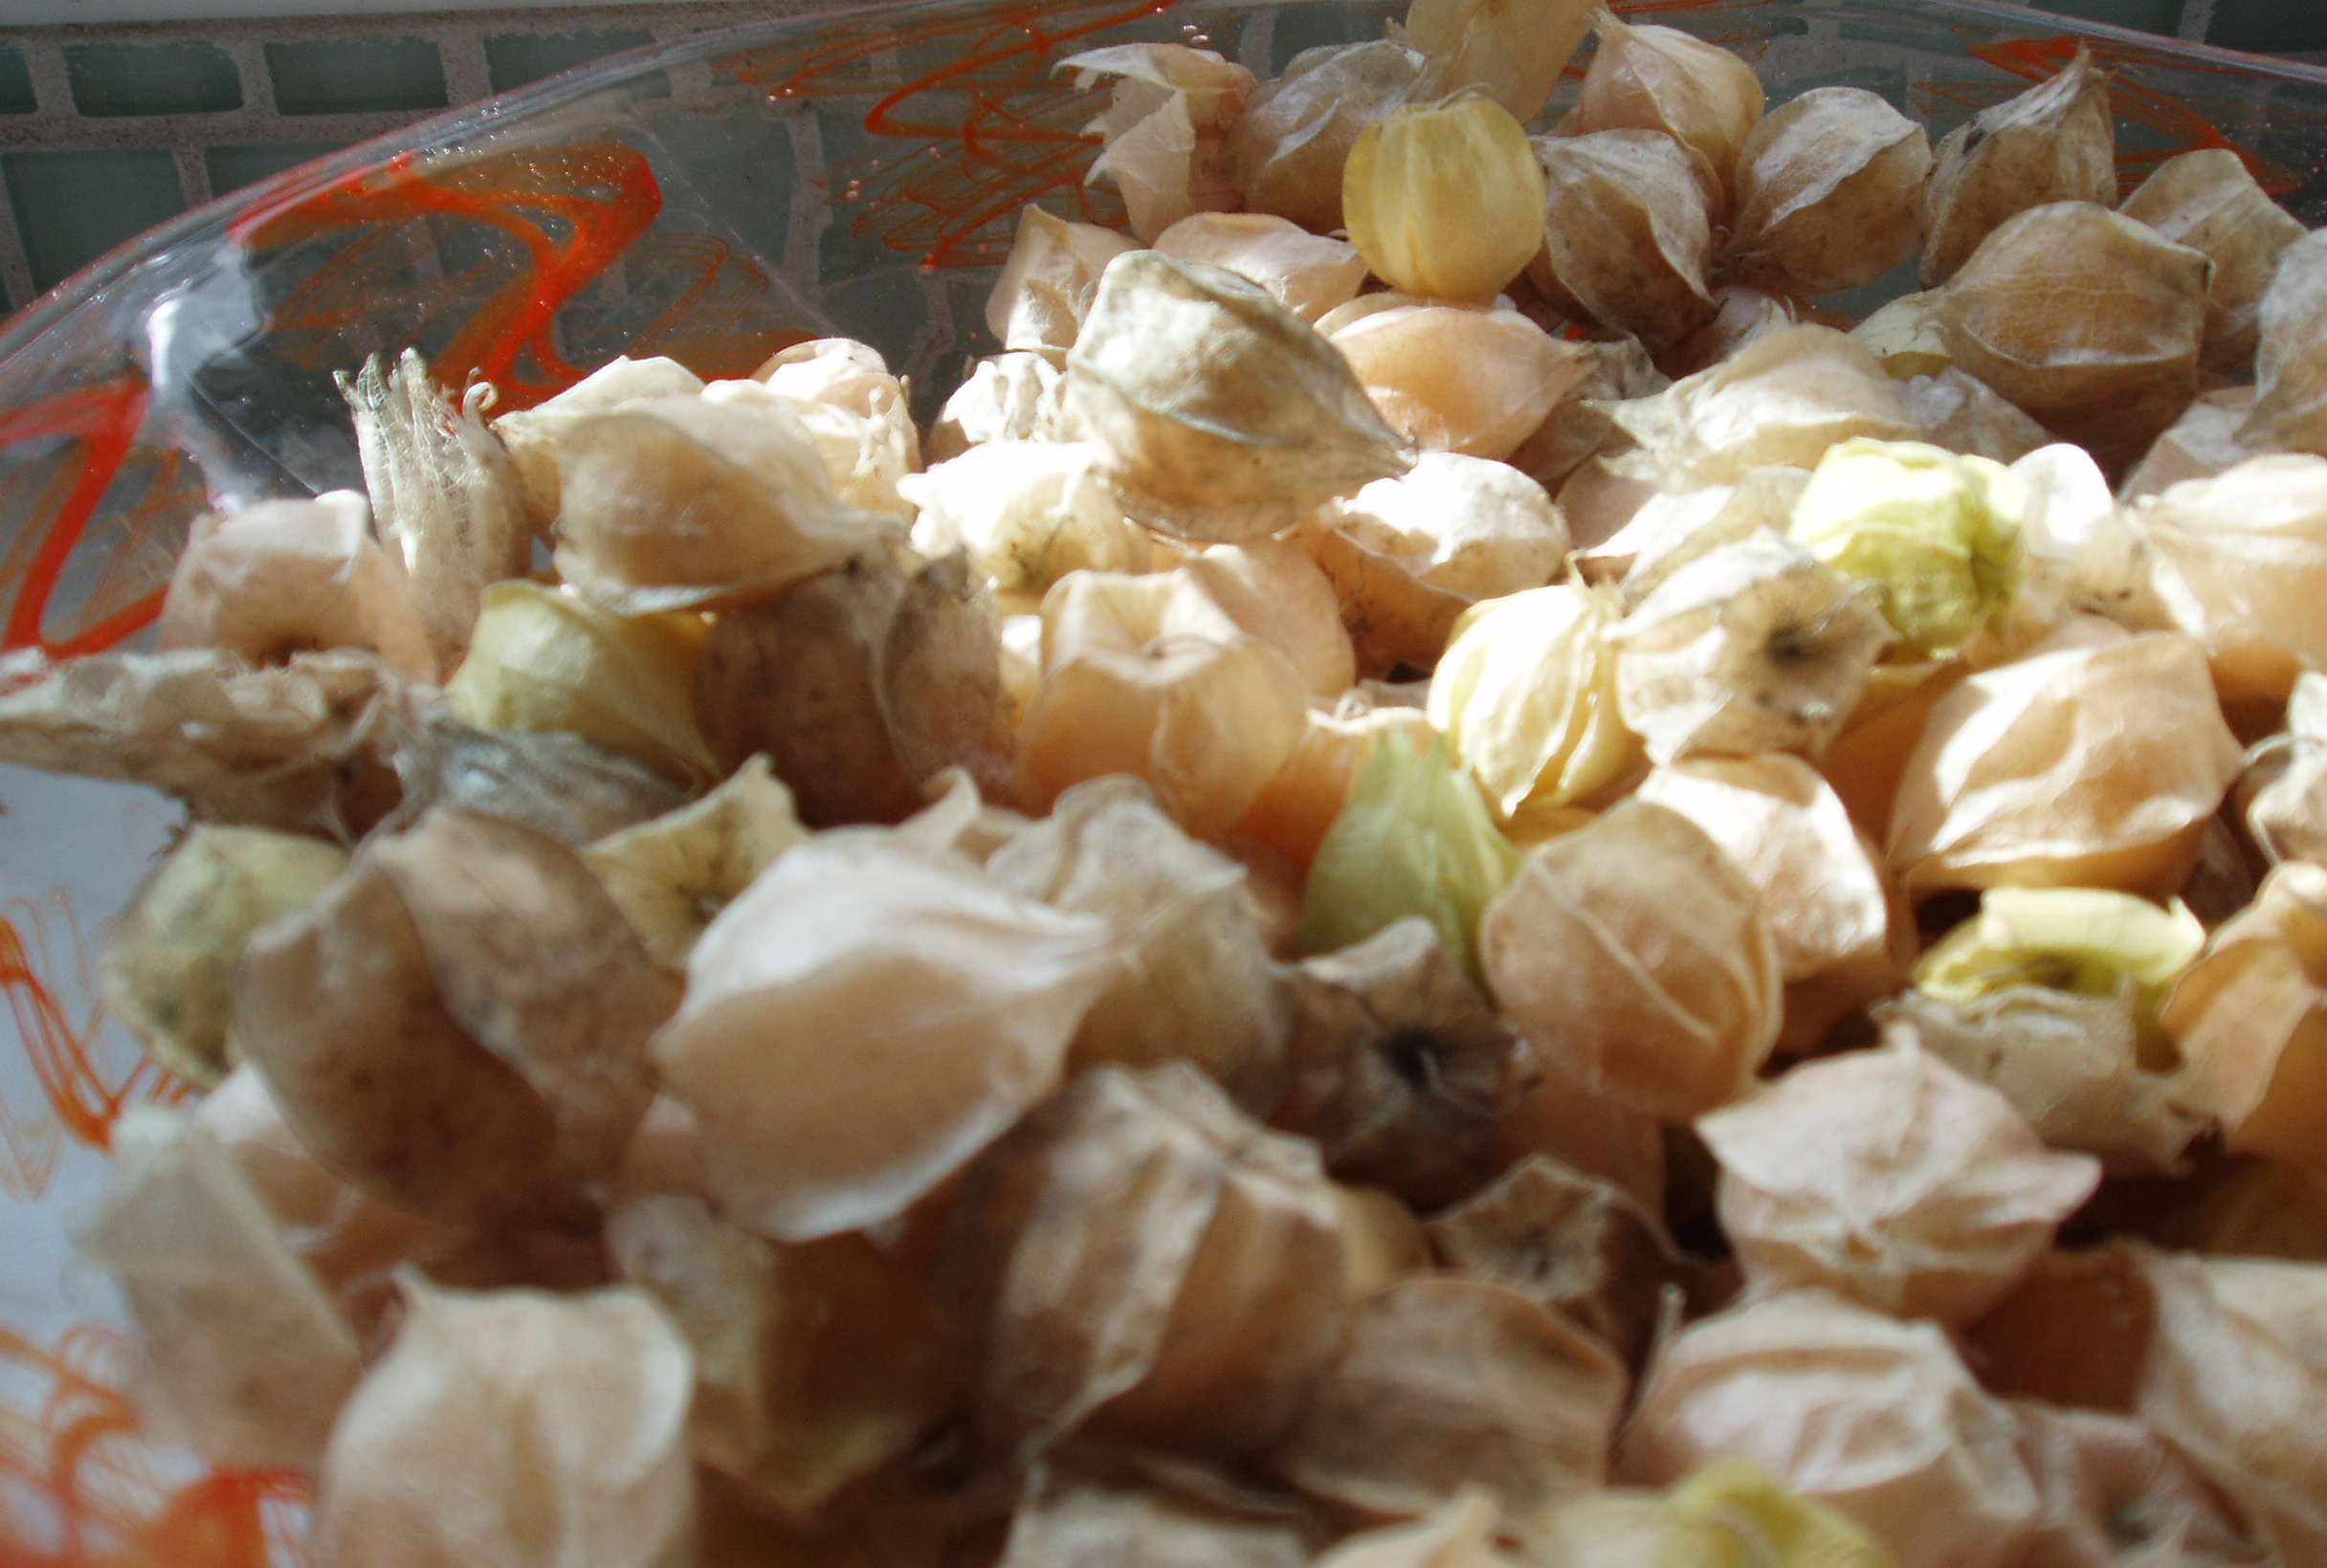 Ground Cherries - Now you see them...